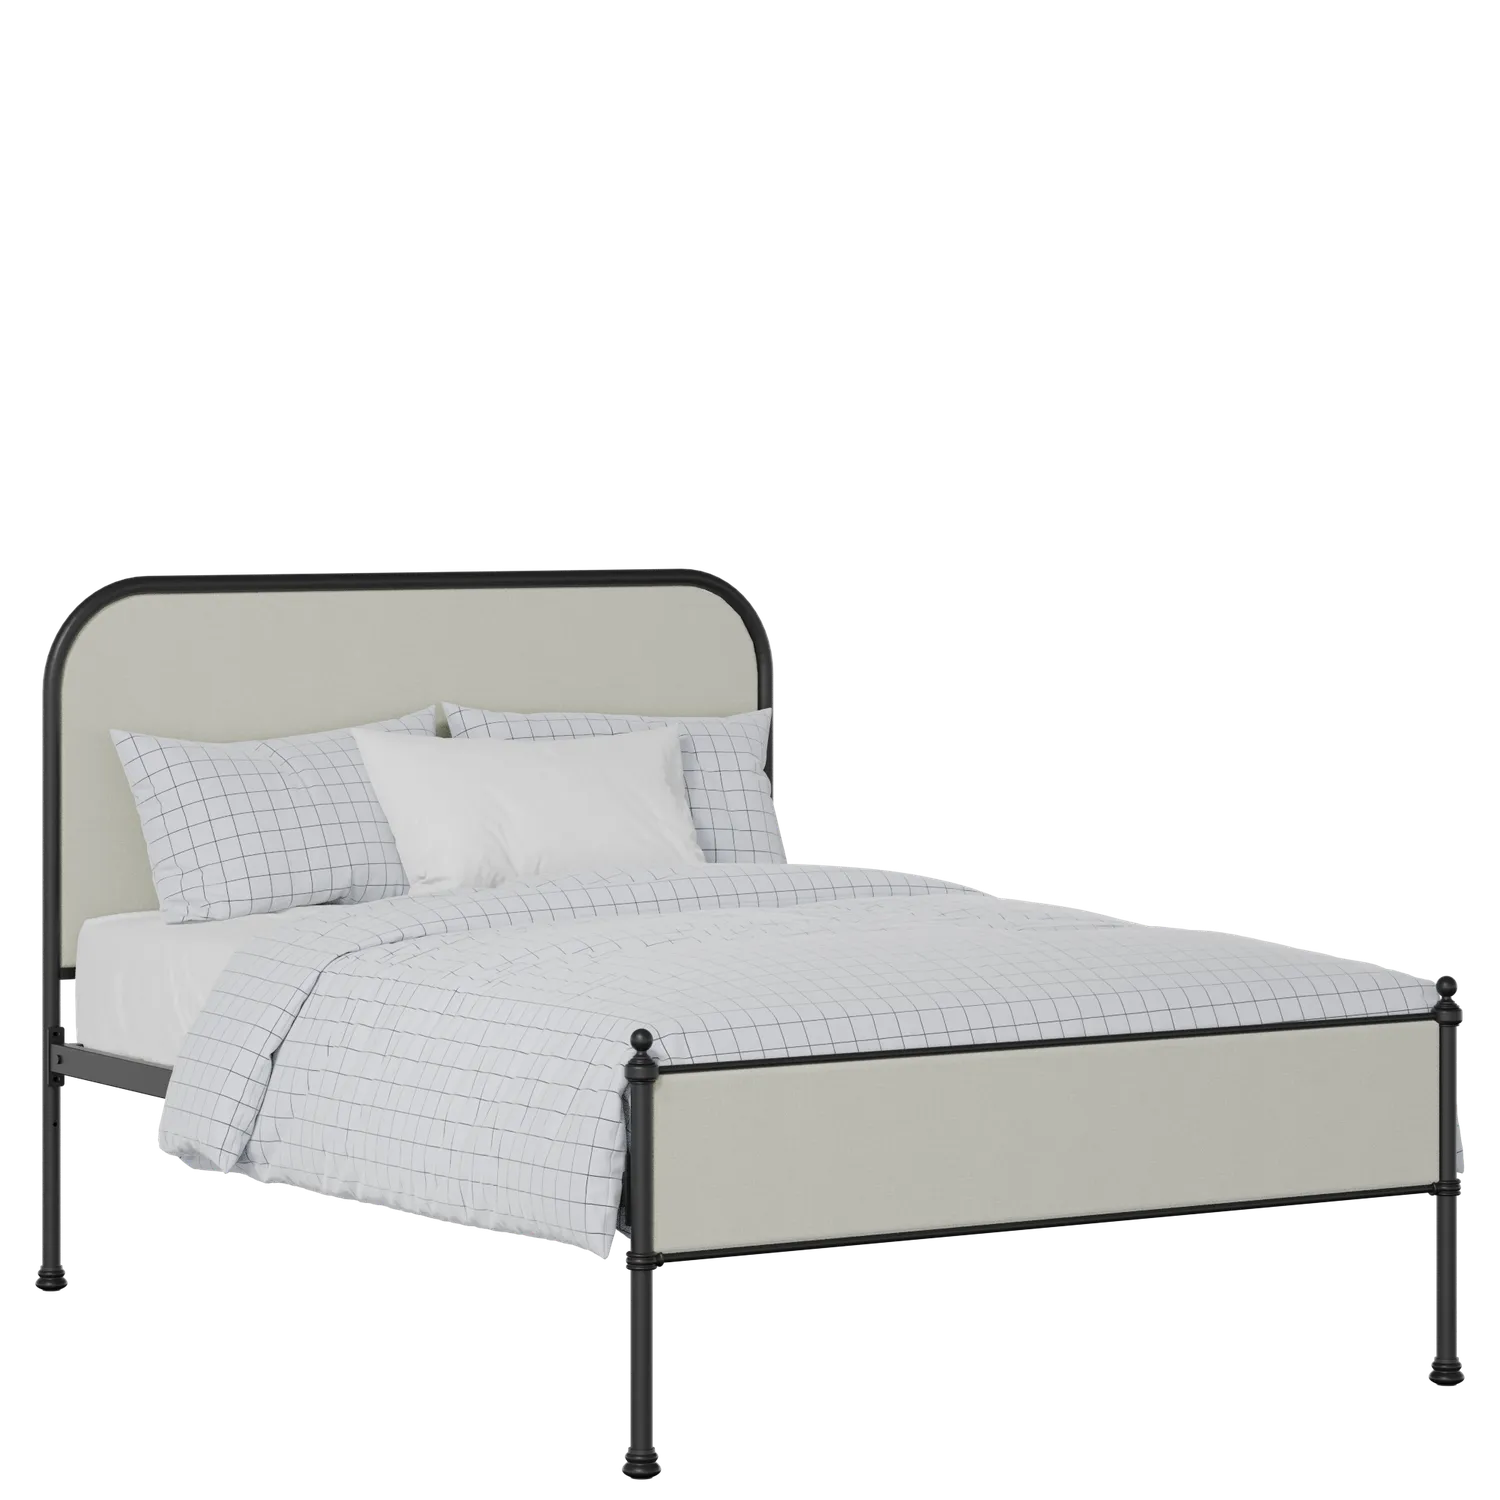 Bray Slim iron/metal upholstered bed in black with oatmeal fabric